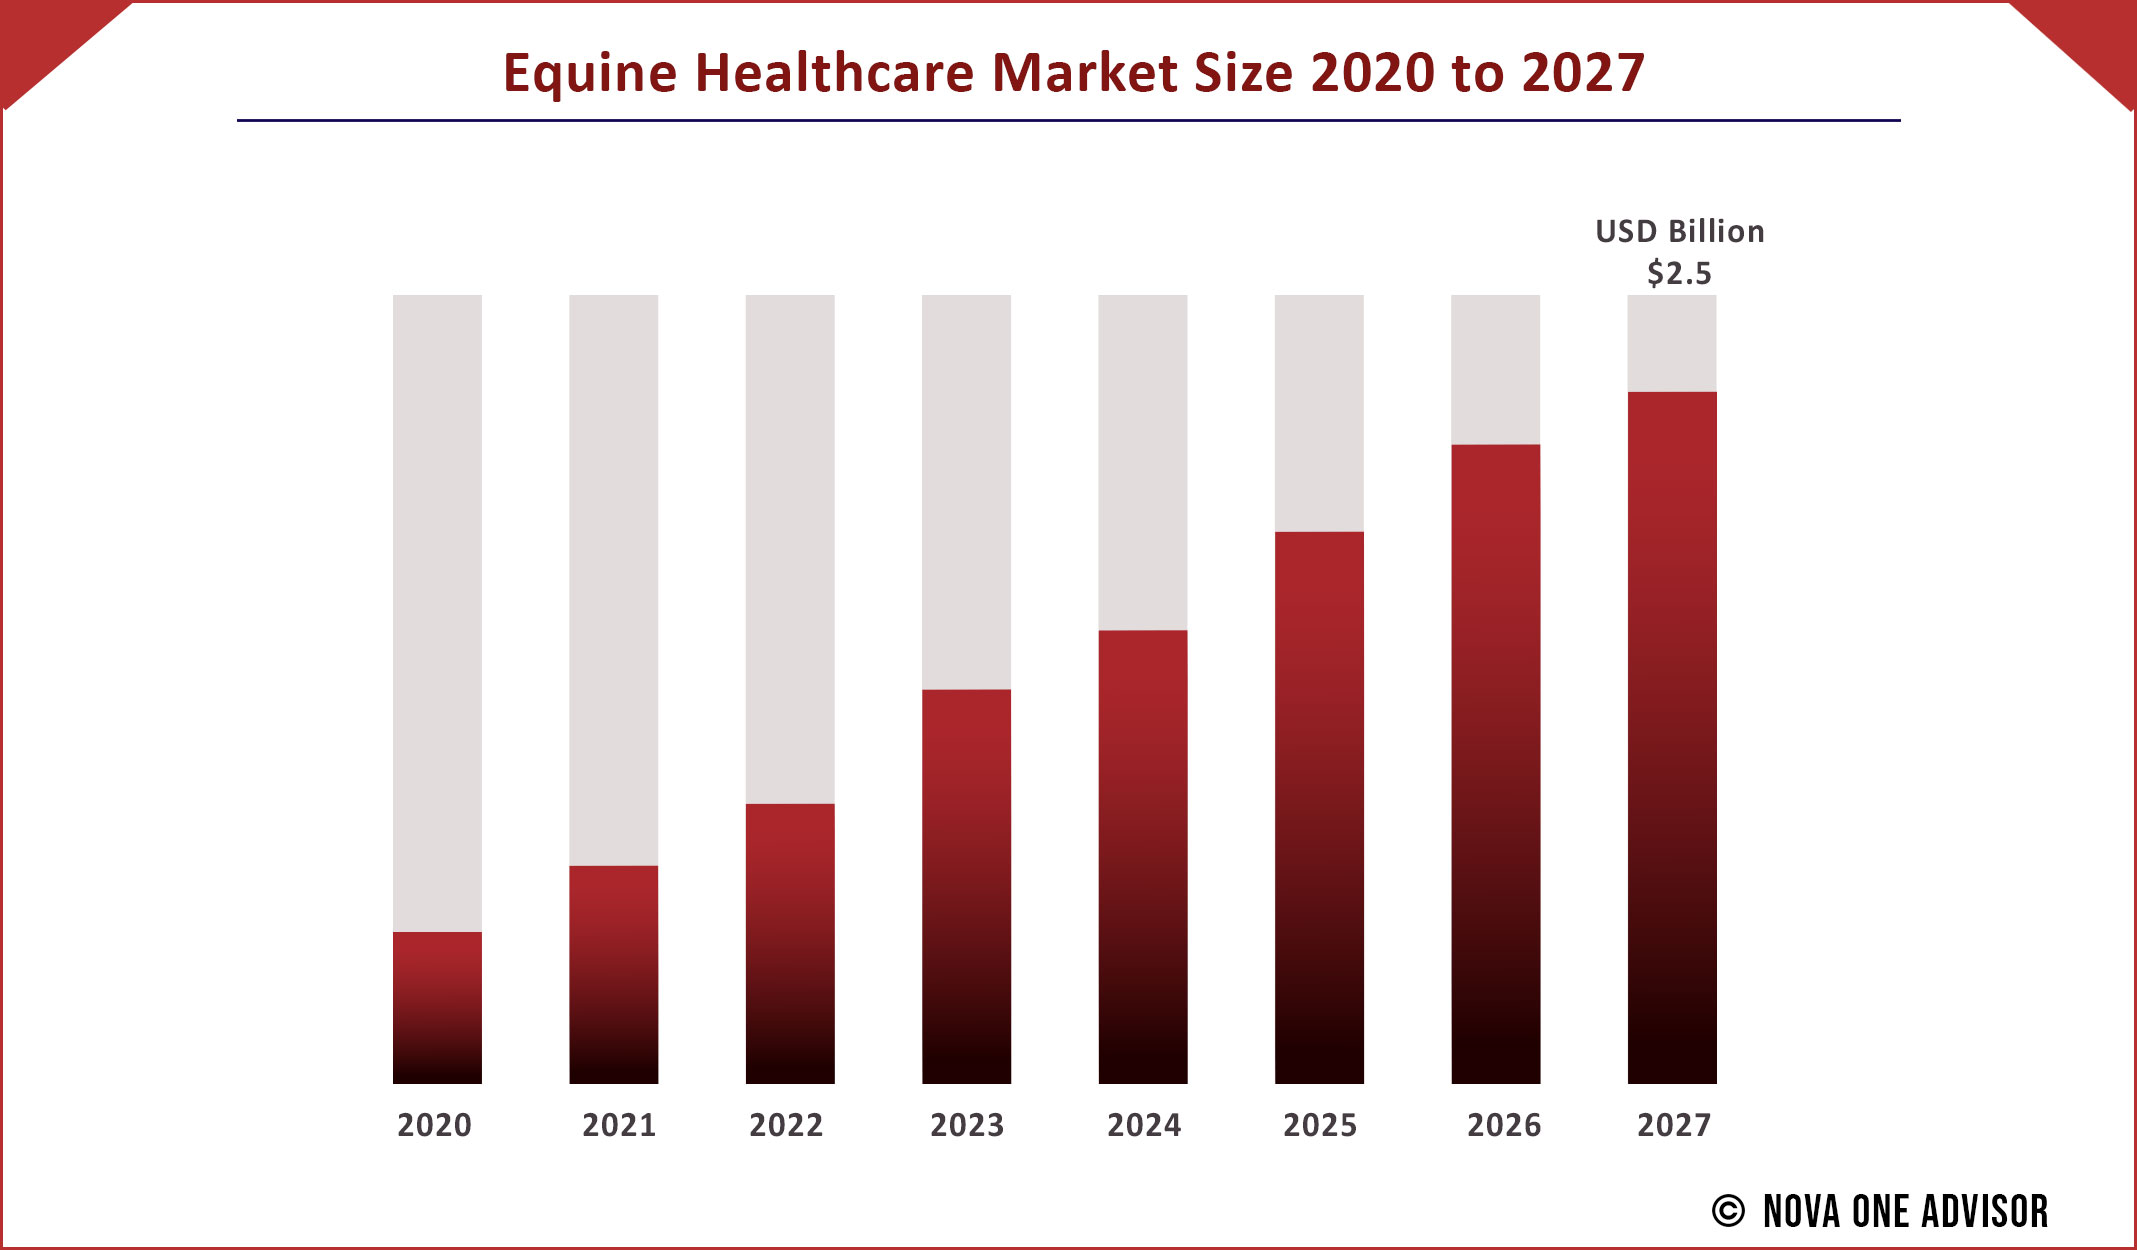 Equine Healthcare Market Size 2020 to 2027